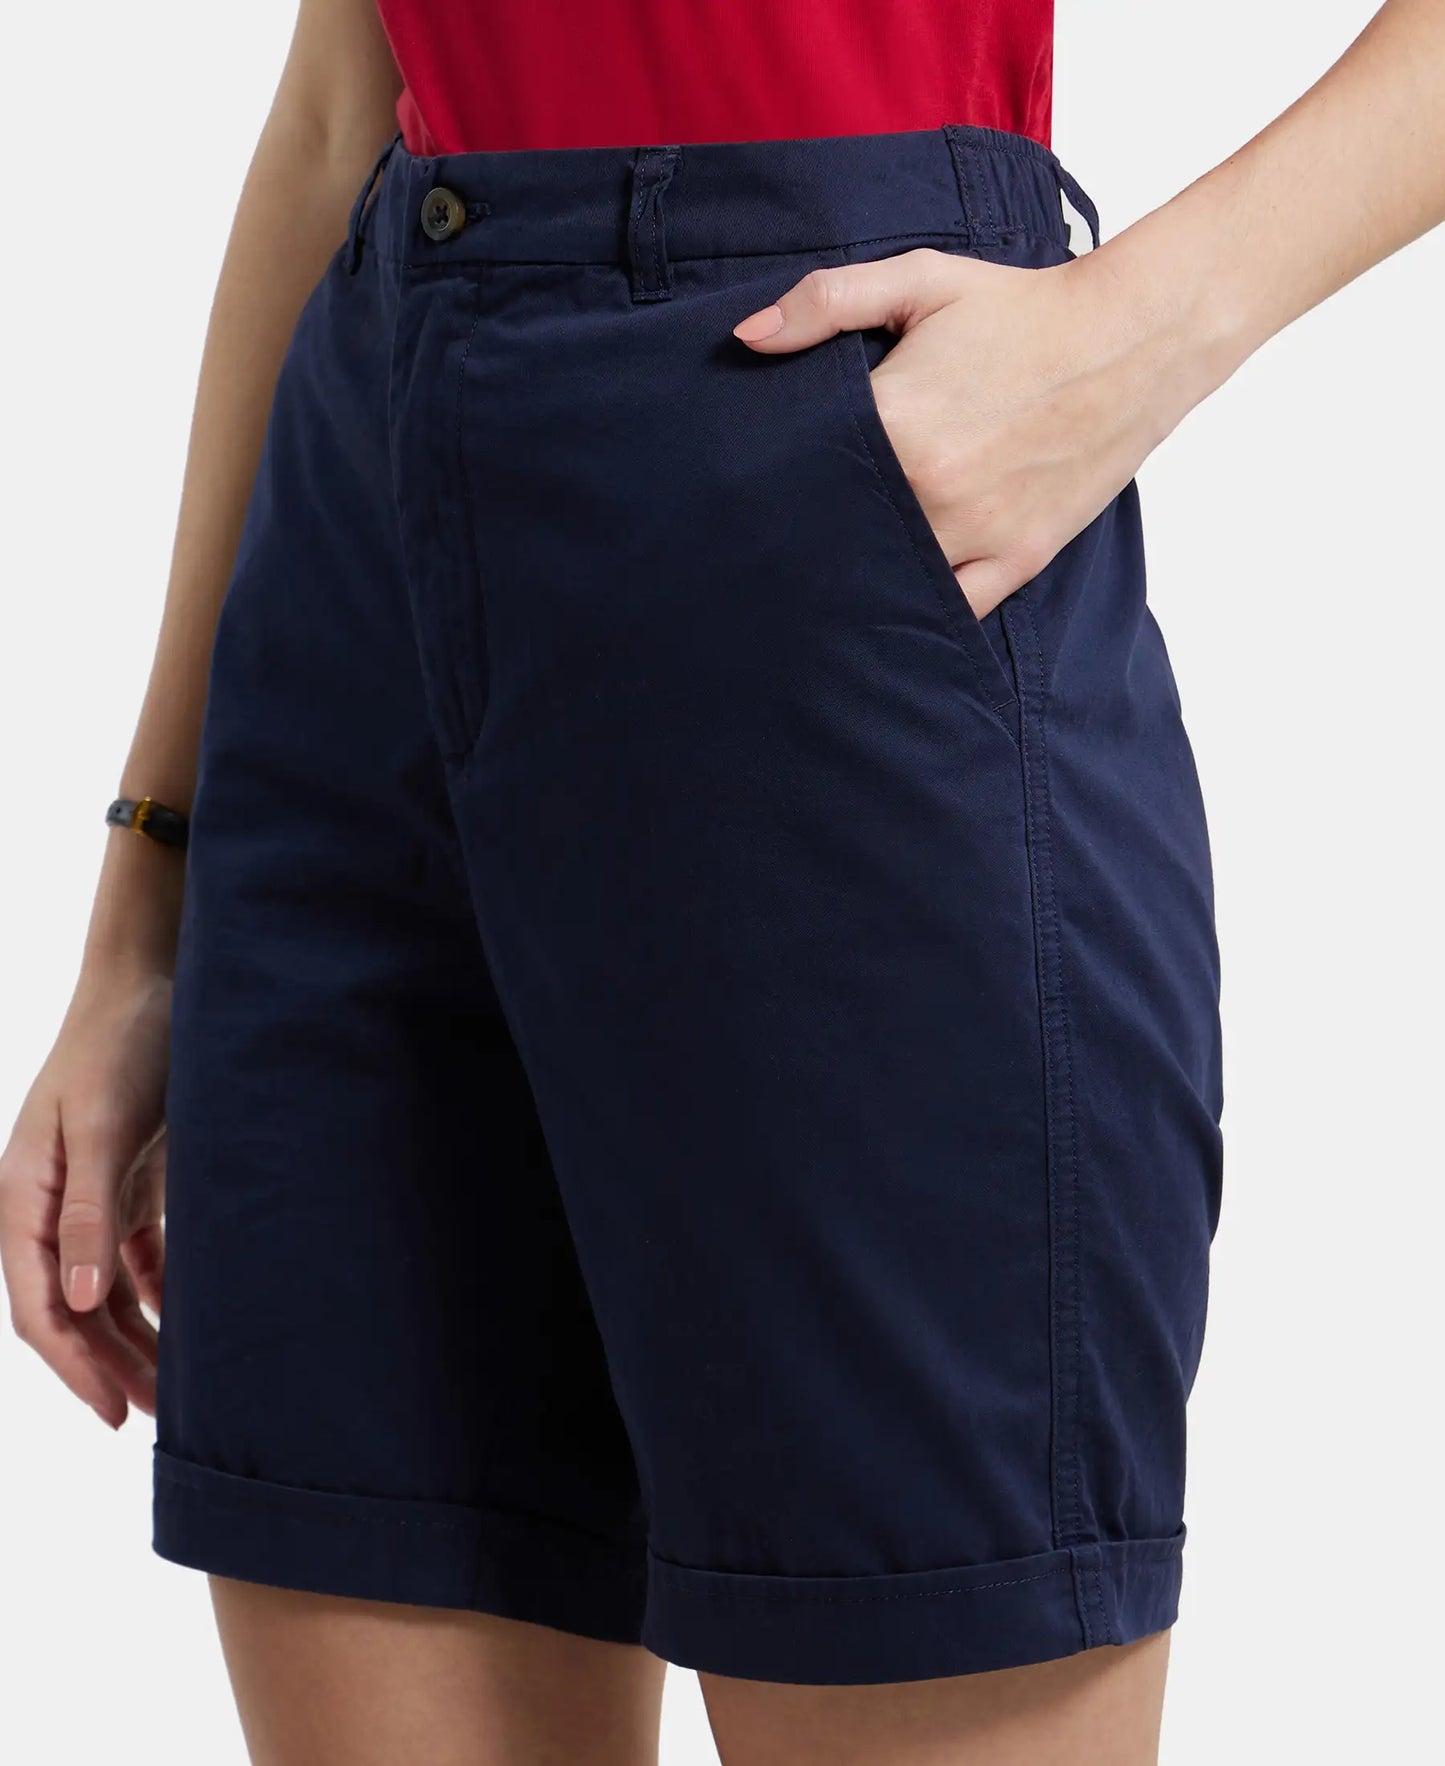 Super Combed Cotton Woven Twill Fabric Relaxed Fit Shorts with Convenient Side Pockets - Navy Blazer-7